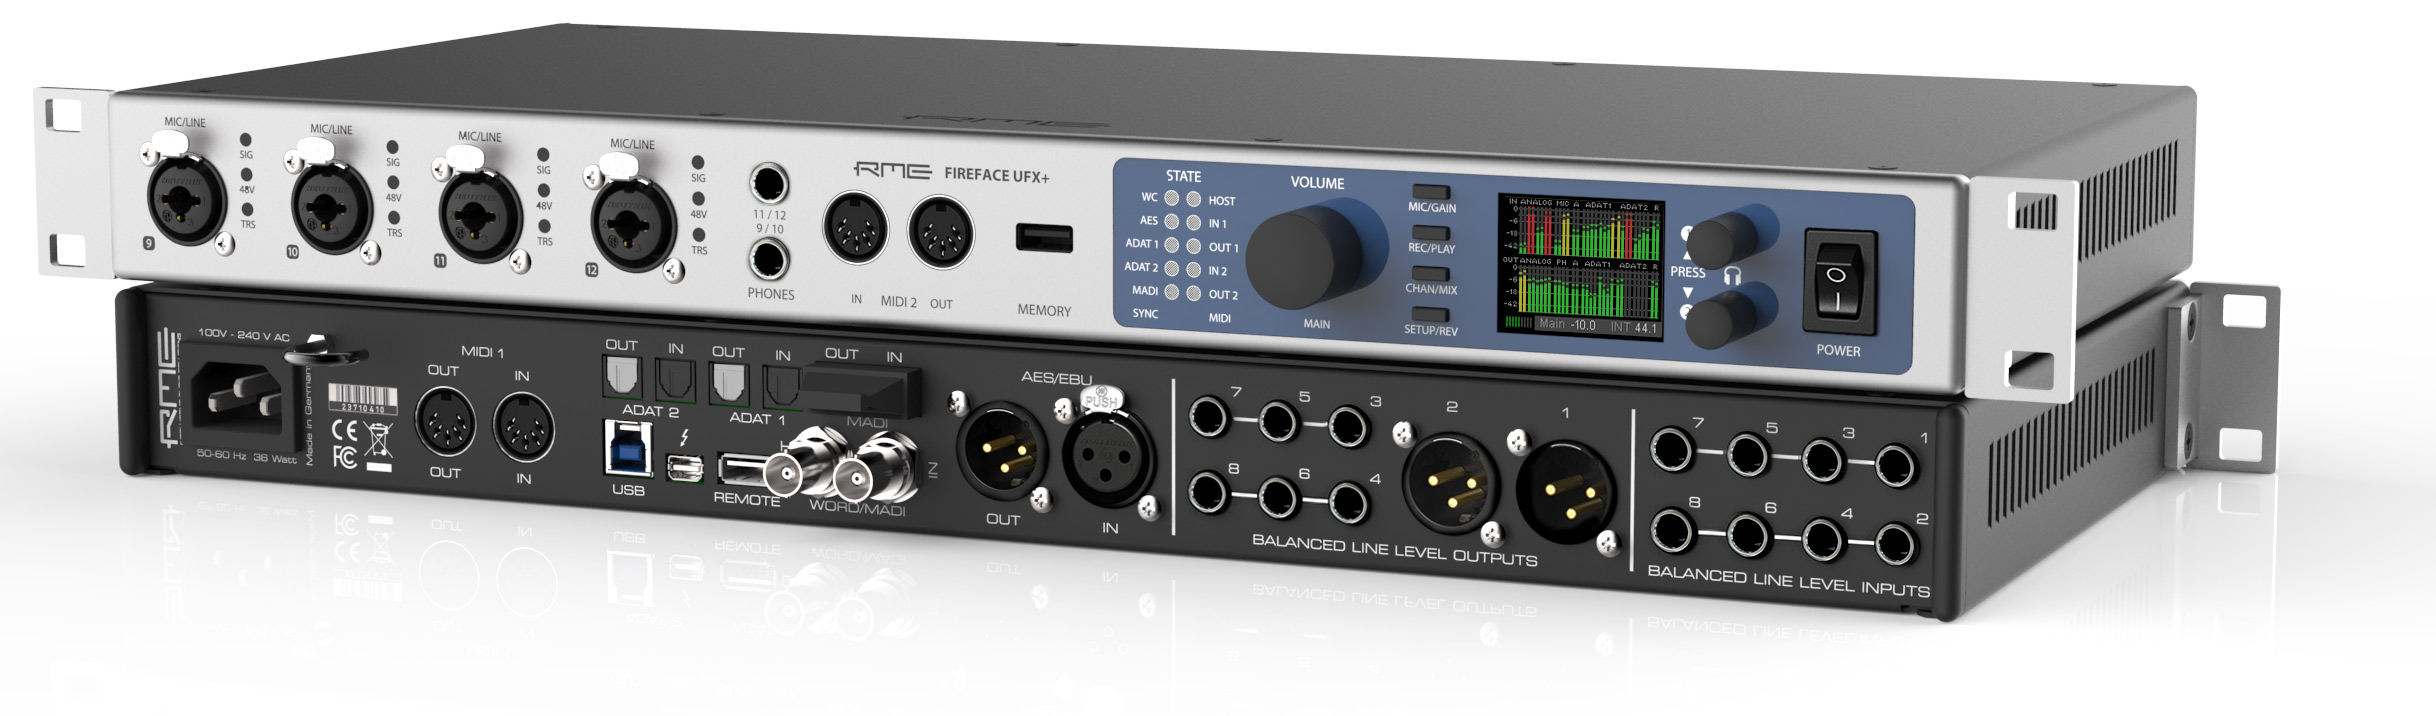 New Gear Review: Fireface UFX+ by RME